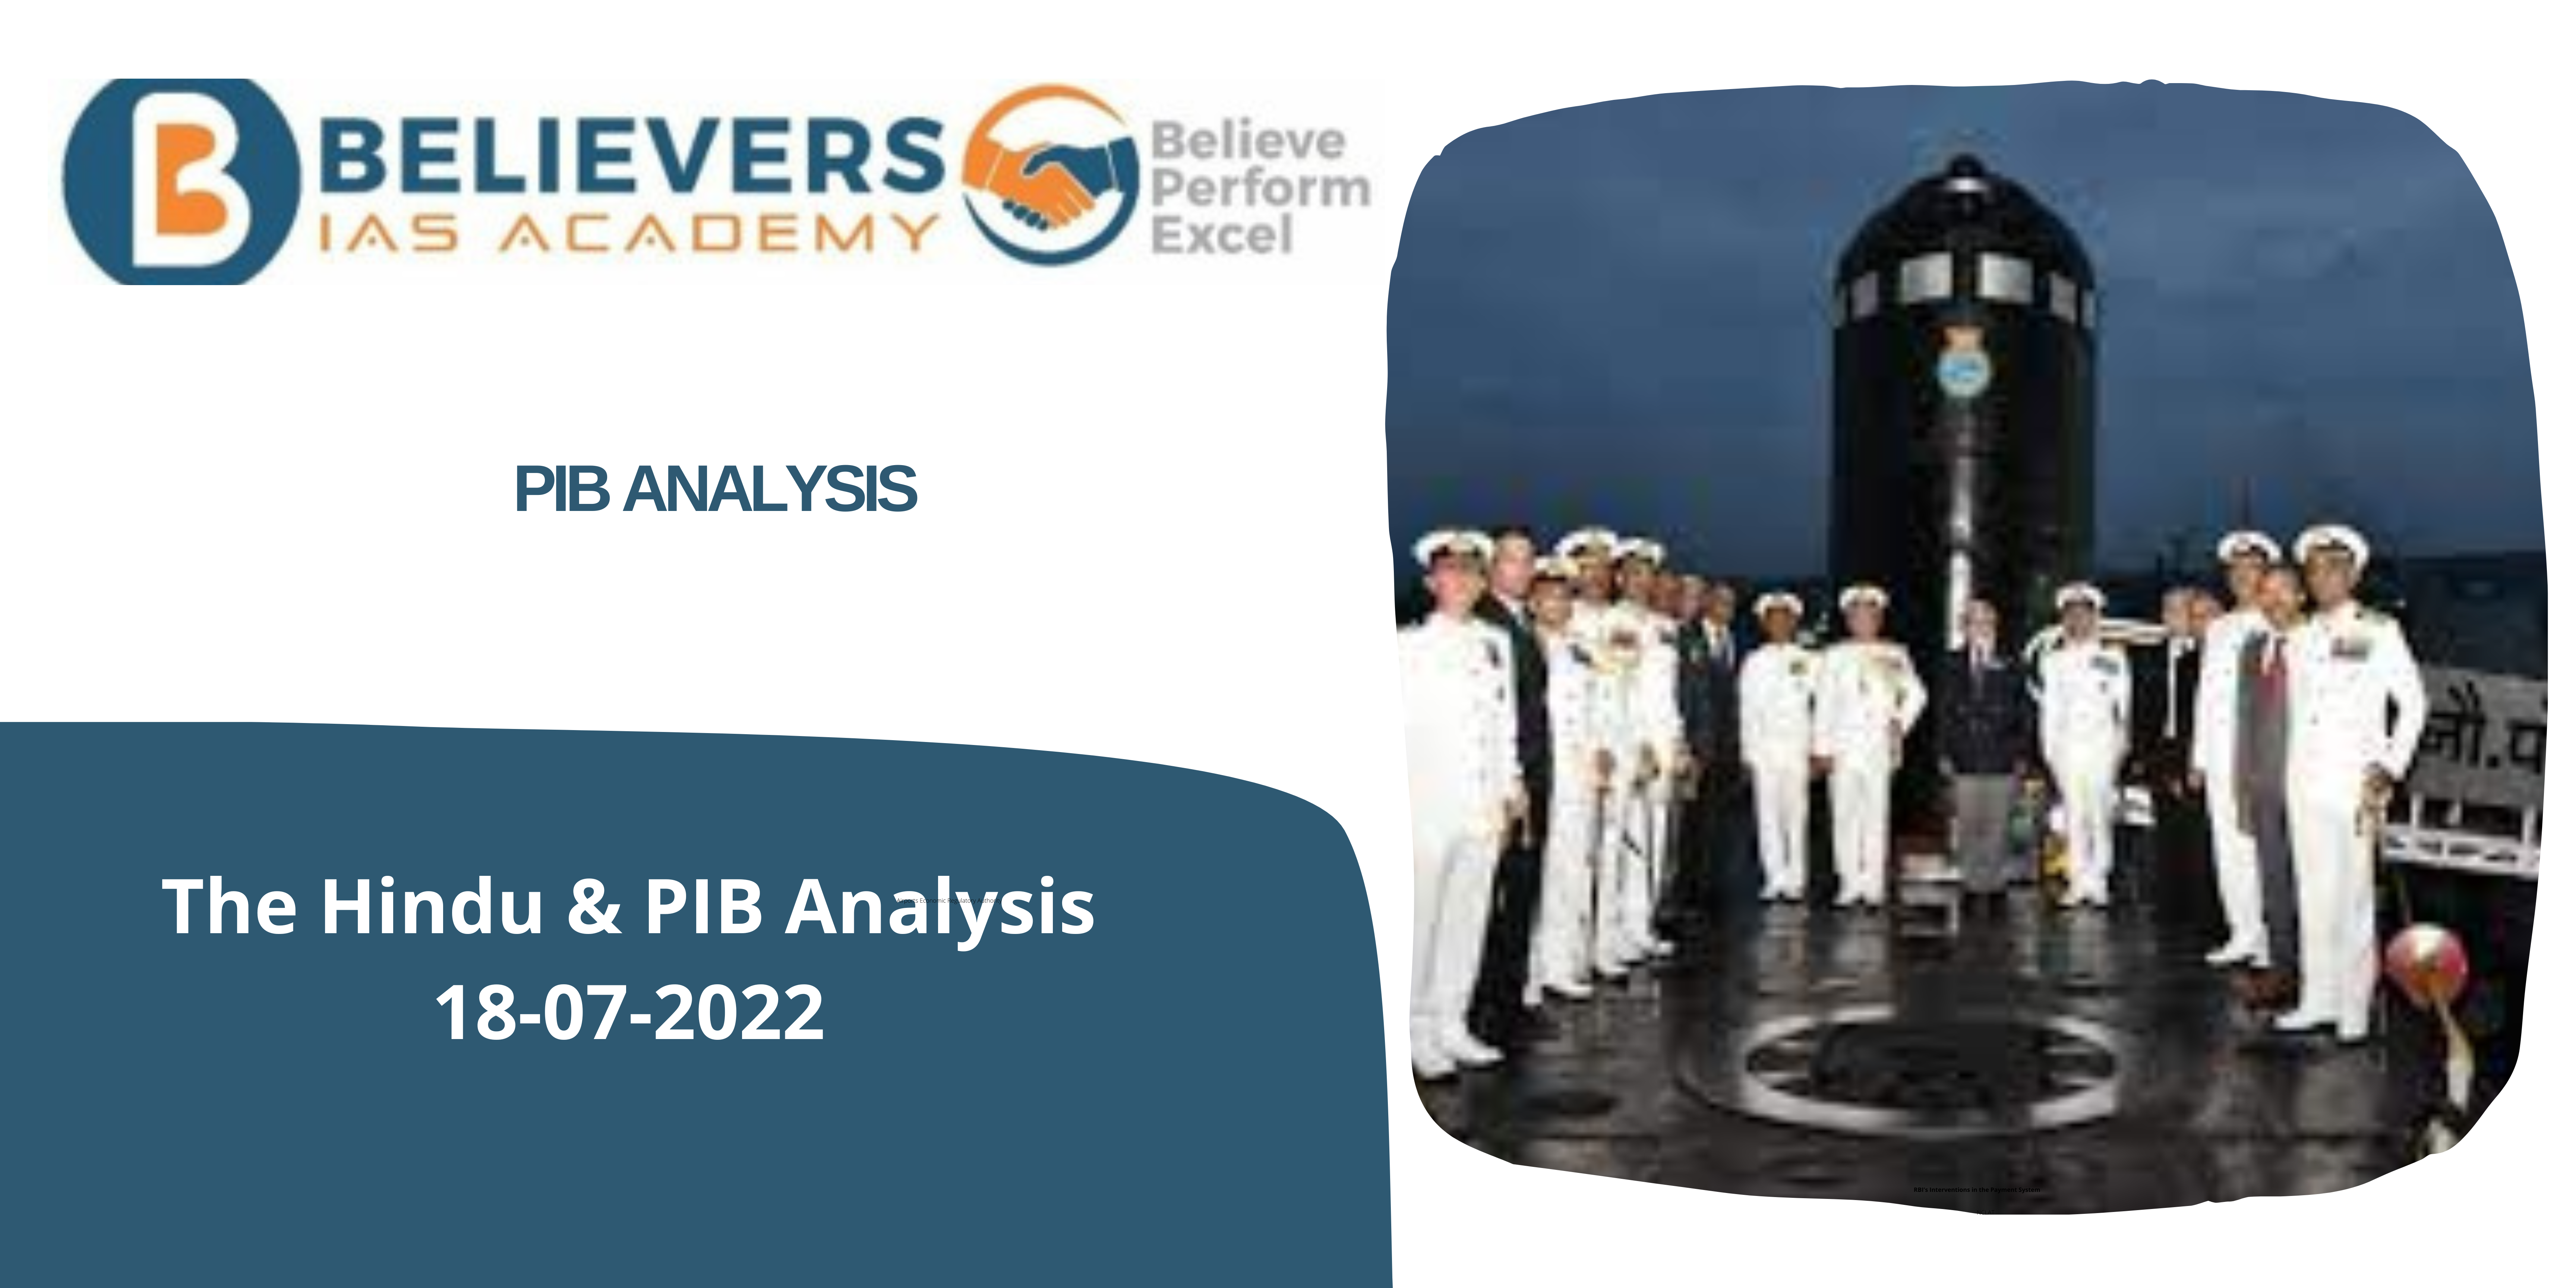 PIB Analysis for Civil Services - 18th July, 2022